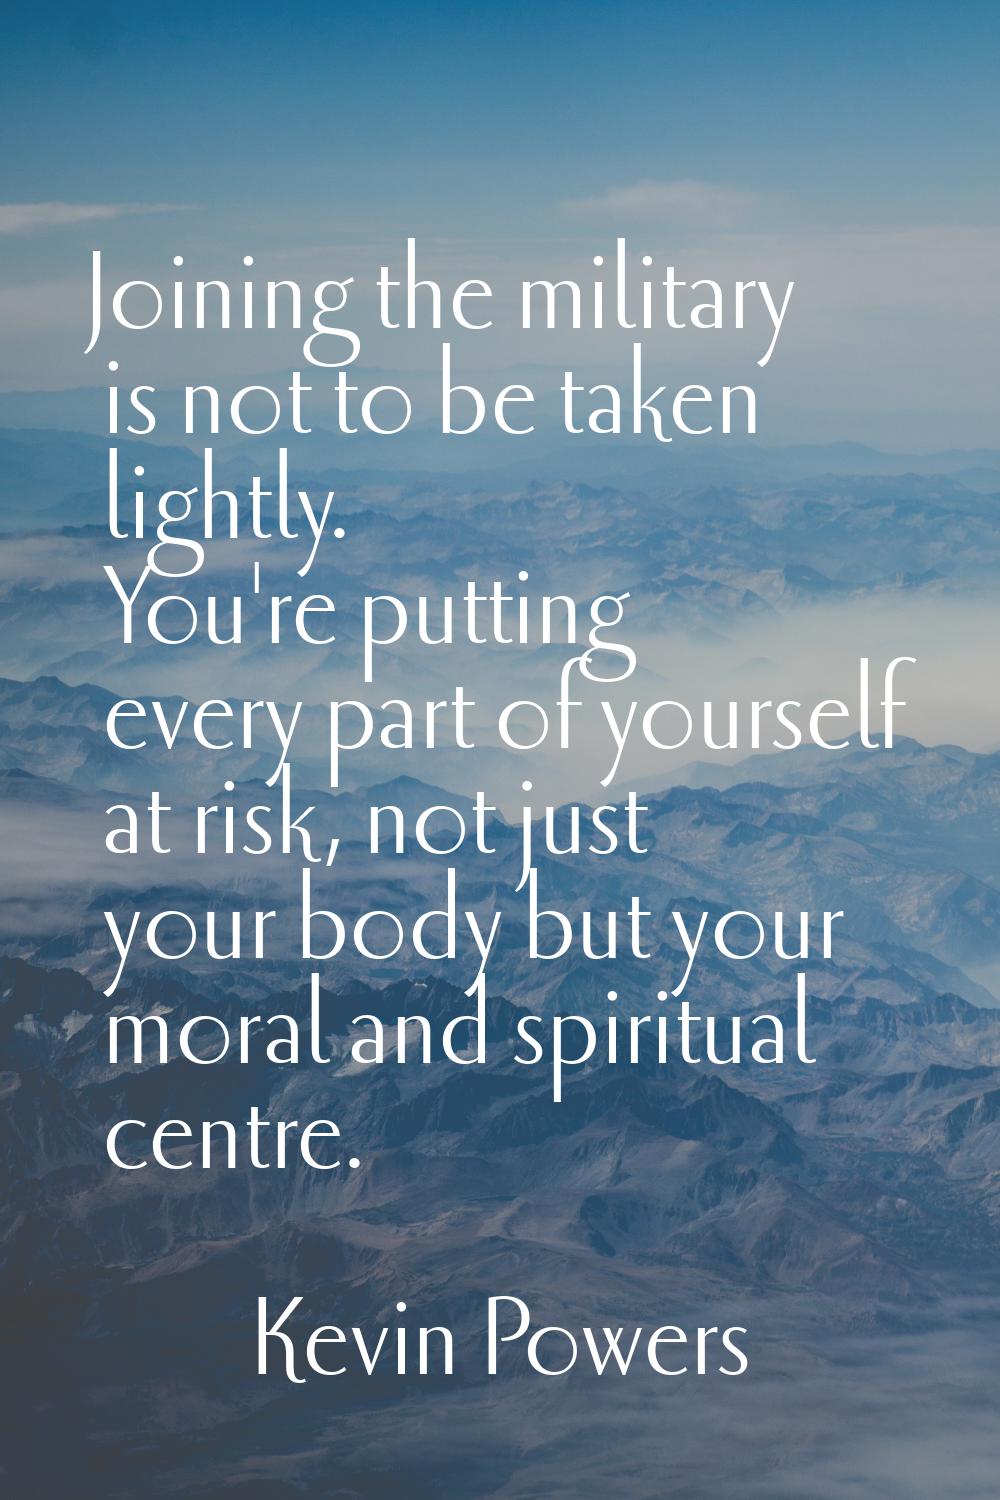 Joining the military is not to be taken lightly. You're putting every part of yourself at risk, not